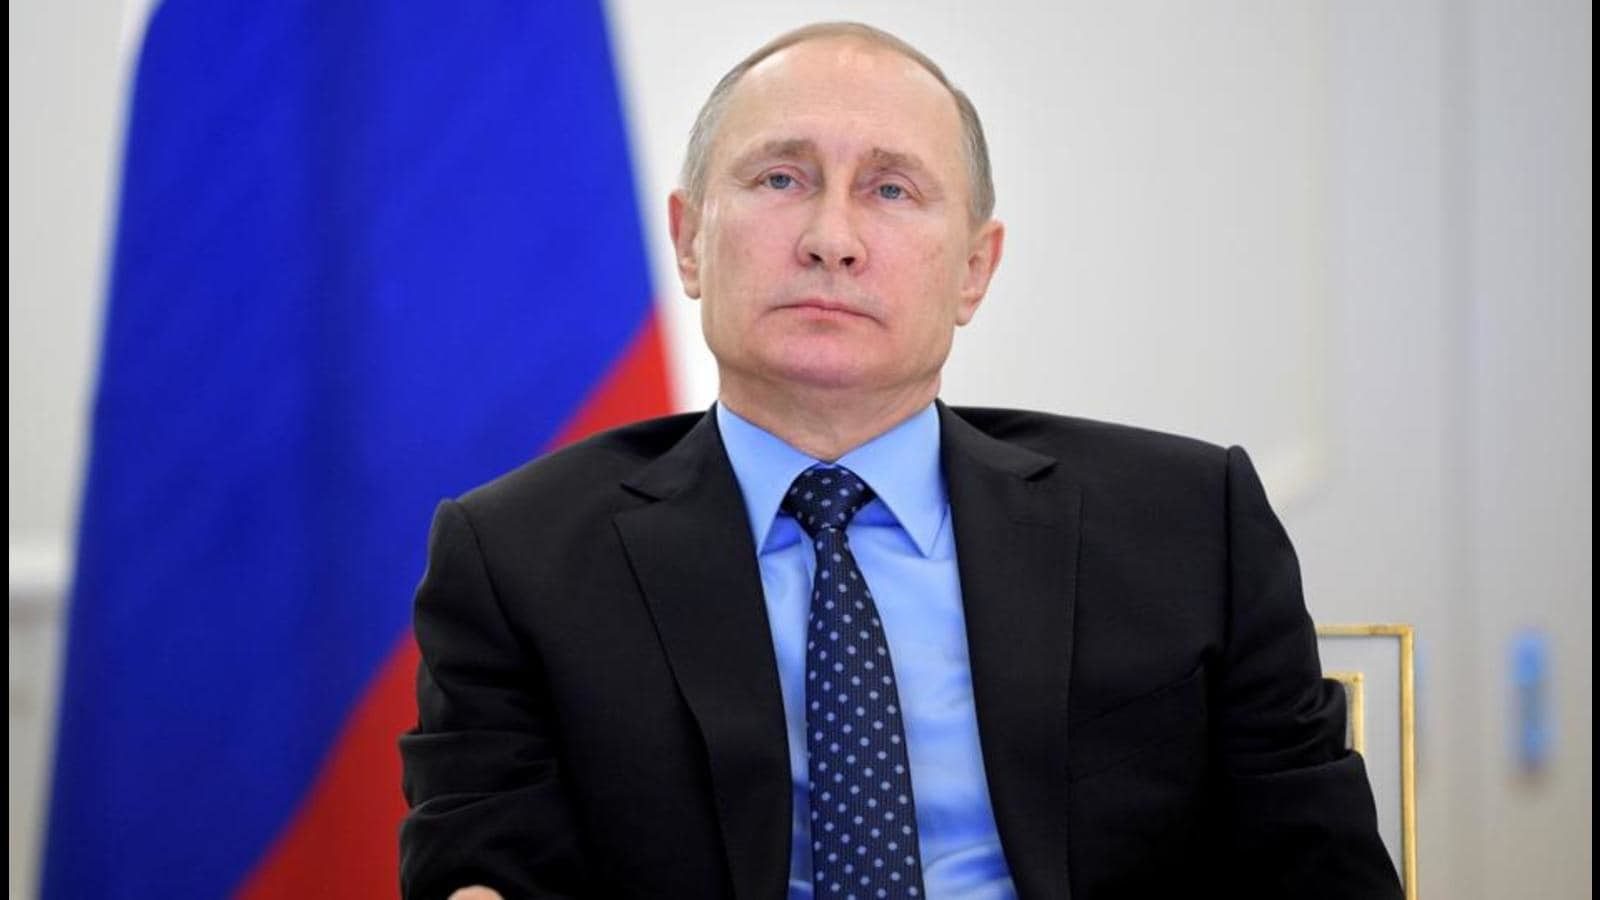 Putin's Approval Rating Rises in Russia